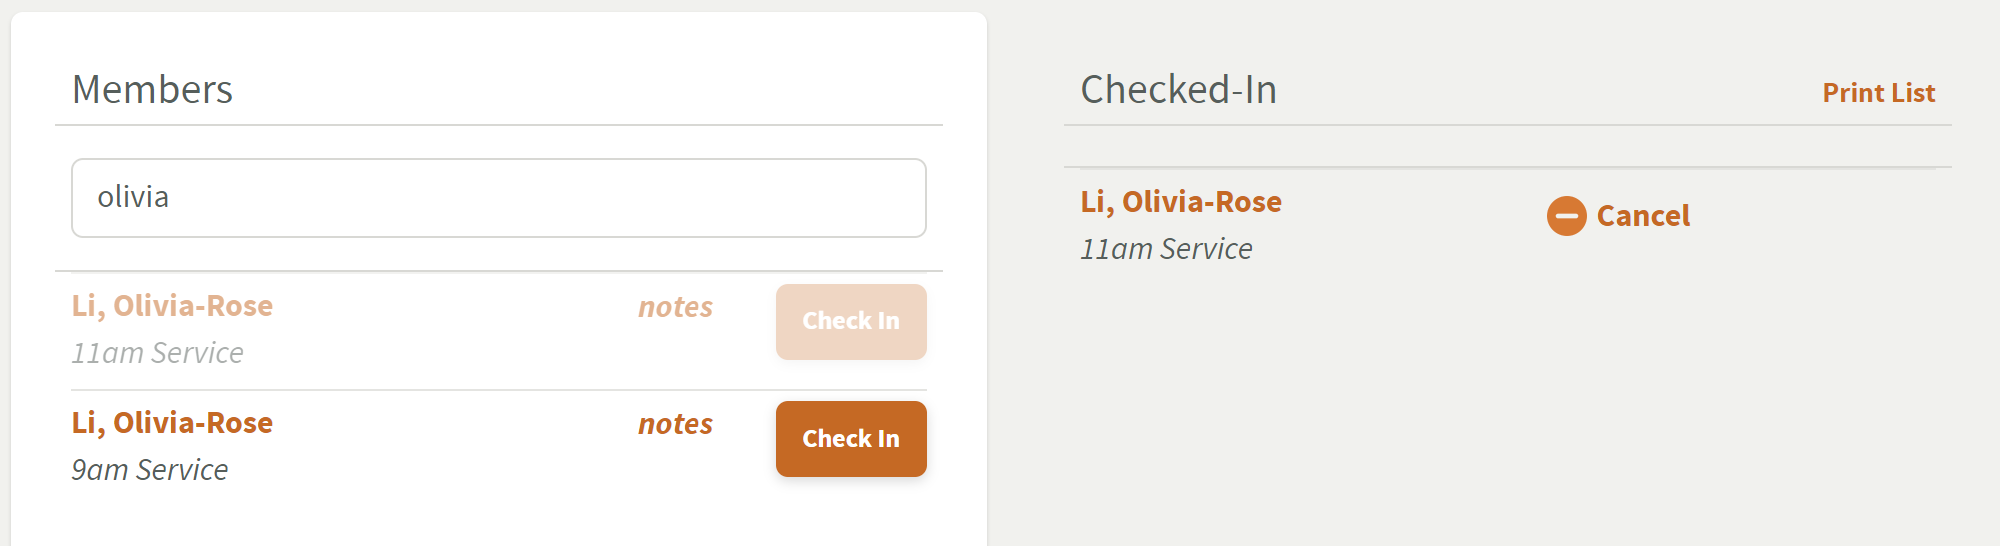 Example of checking in Olivia-Rose to the 11am service